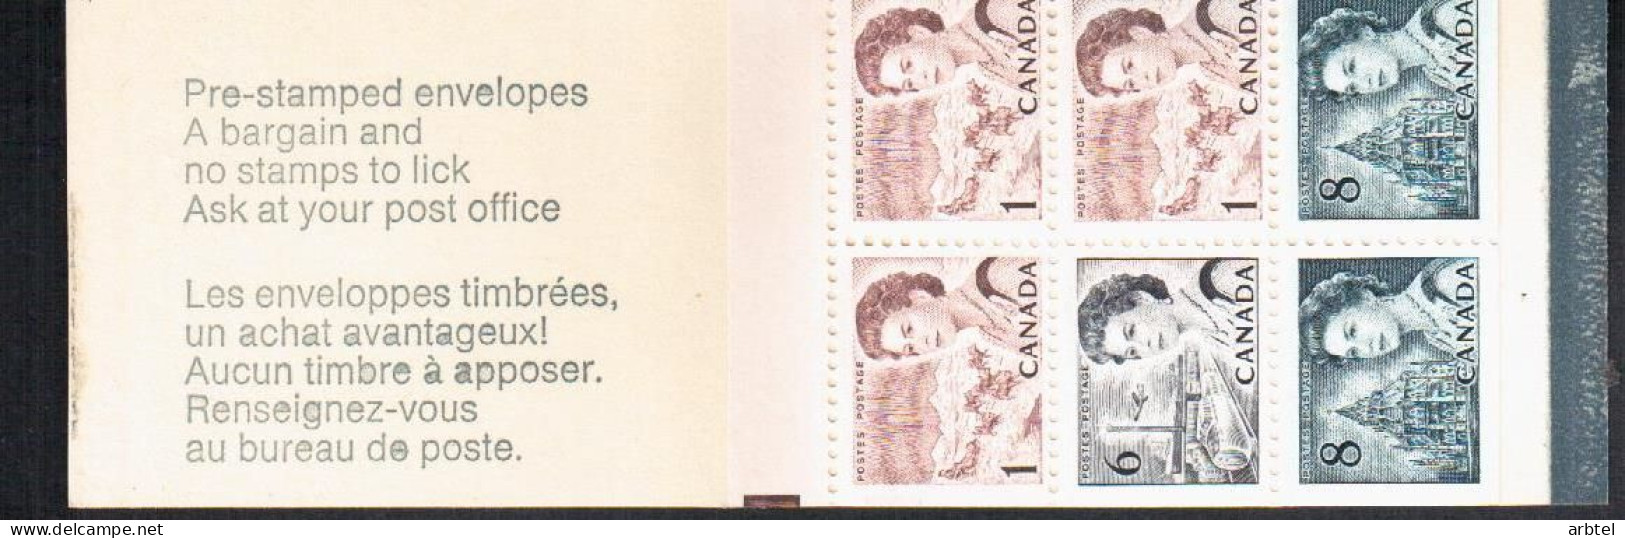 CANADA CARNET BOOKLET STAGE COACH DILIGENCIA CORREO 1820 - Stage-Coaches